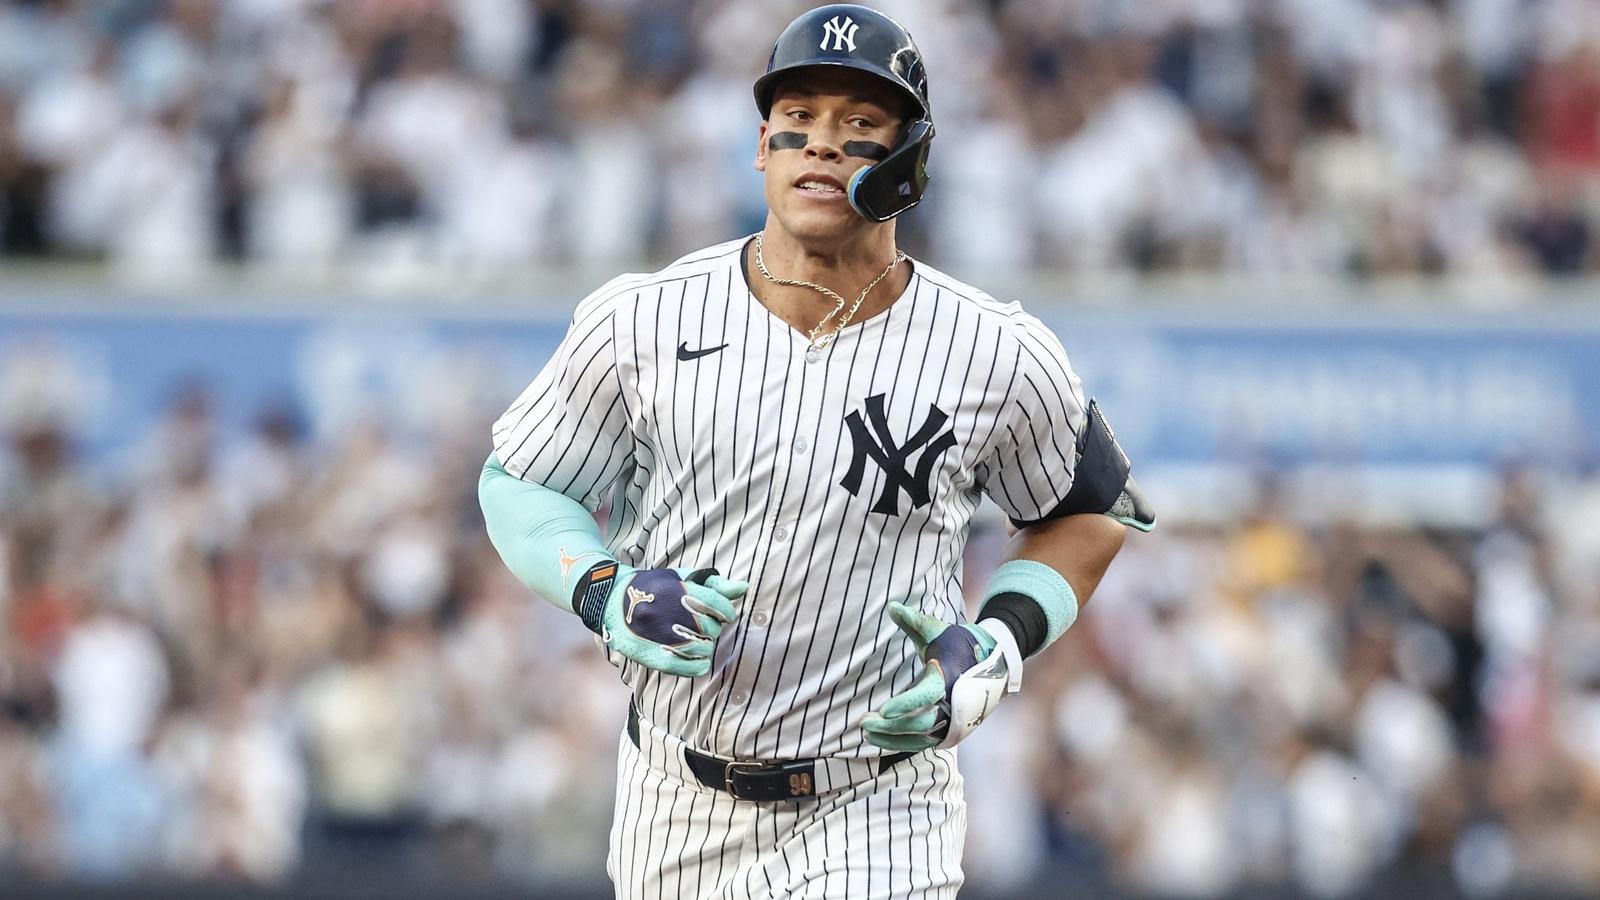 New York Yankees center fielder Aaron Judge (99) runs the bases after hitting a two run home run against the Atlanta Braves in the first inning at Yankee Stadium.